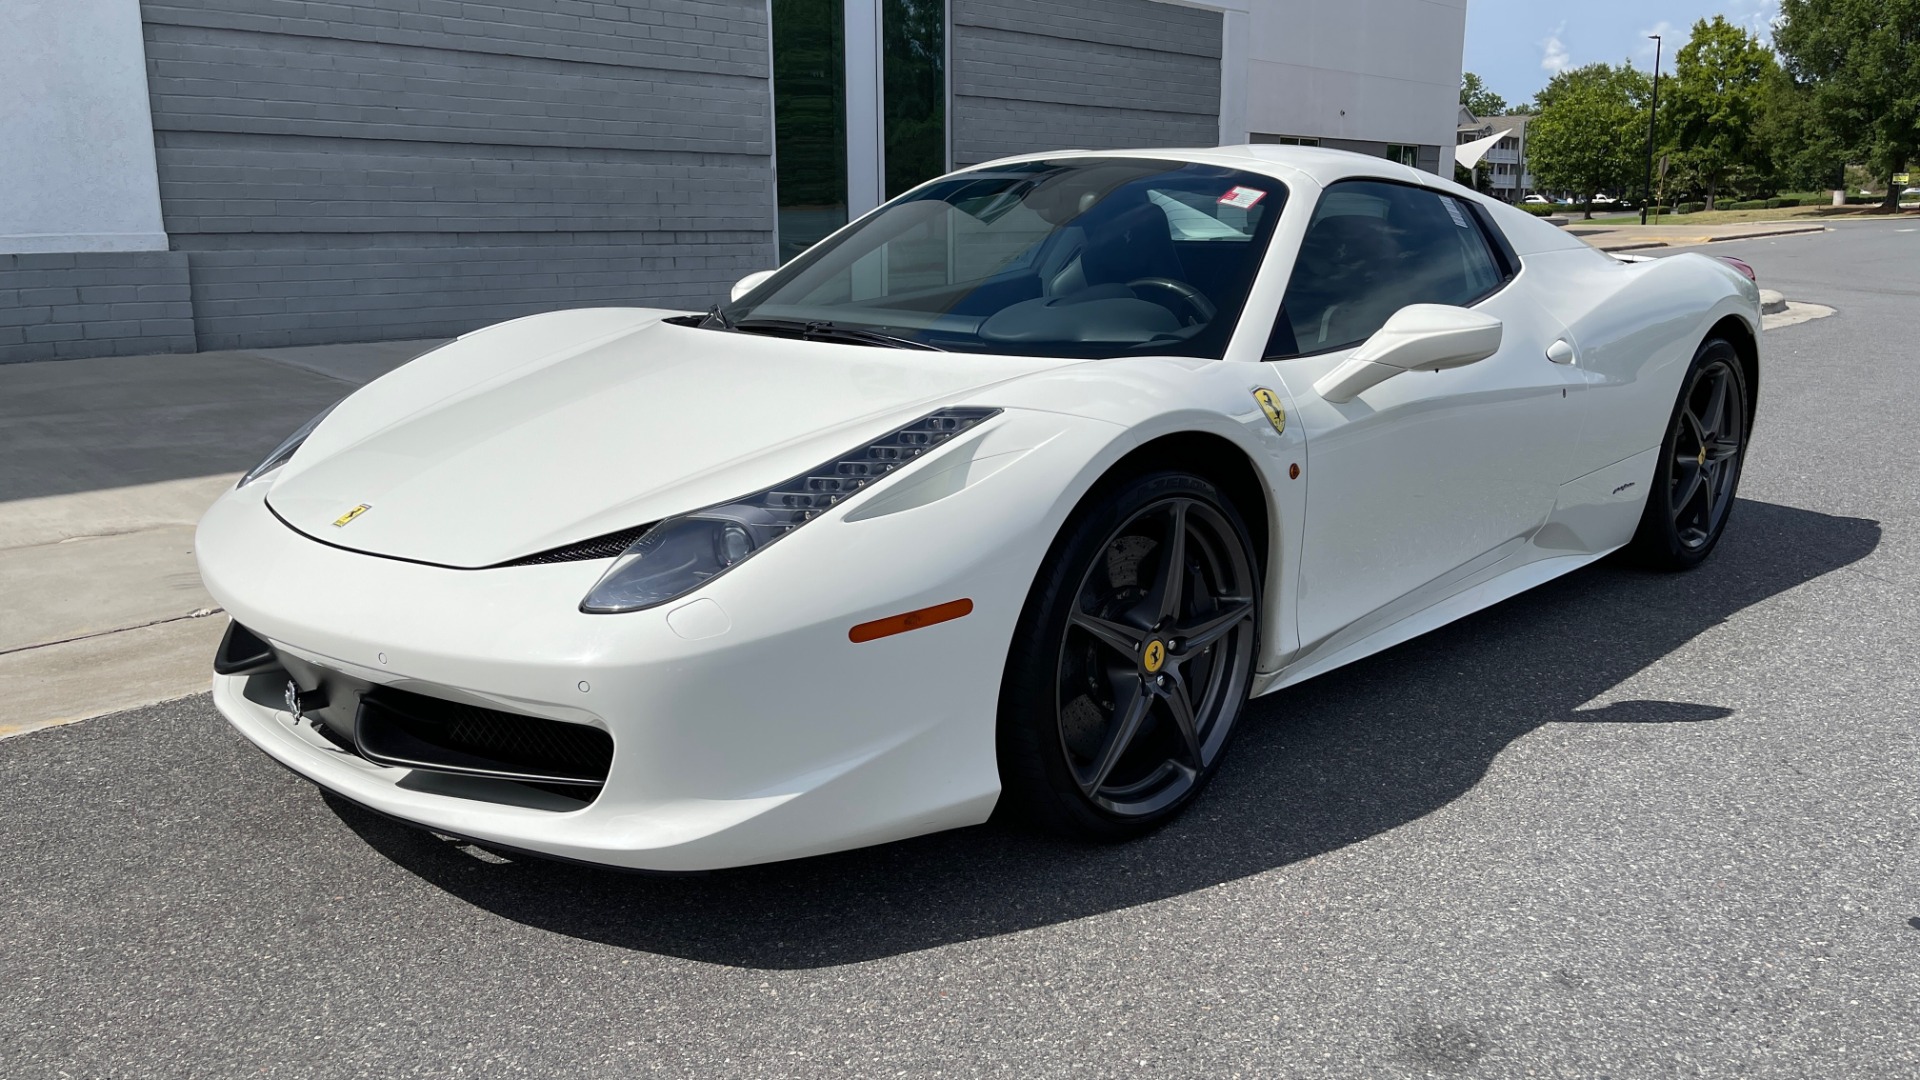 Used 2014 Ferrari 458 ITALIA SPIDER 570HP / F1 AUTO / CF SEATS / CARBON BRAKES / REARVIEW for sale Sold at Formula Imports in Charlotte NC 28227 3